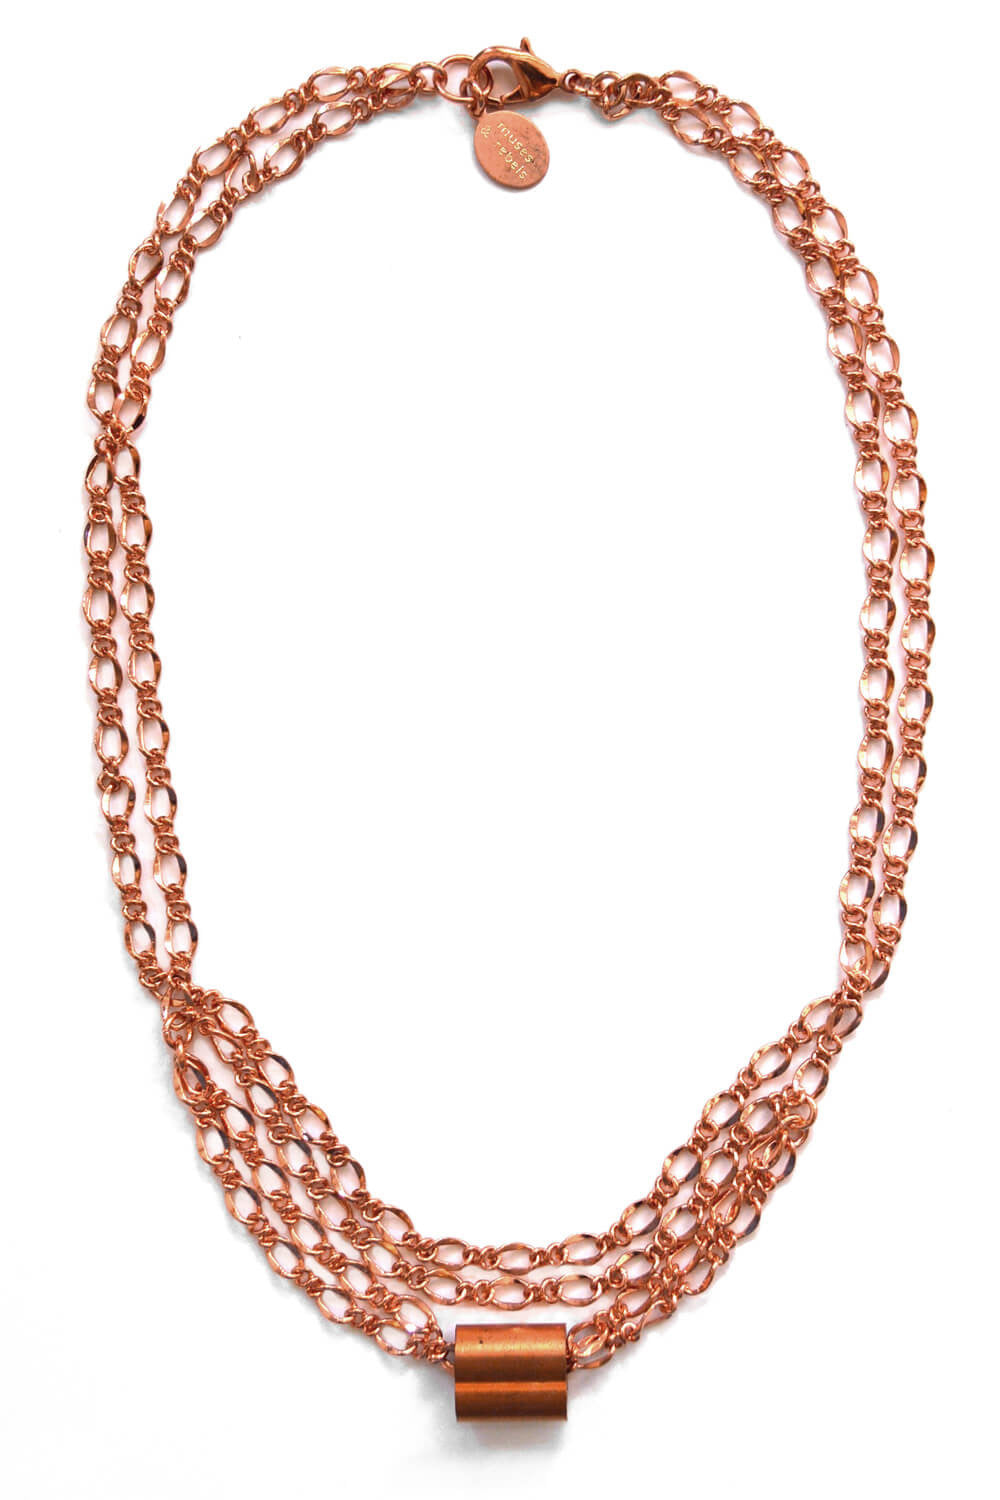 sunset necklace - copper